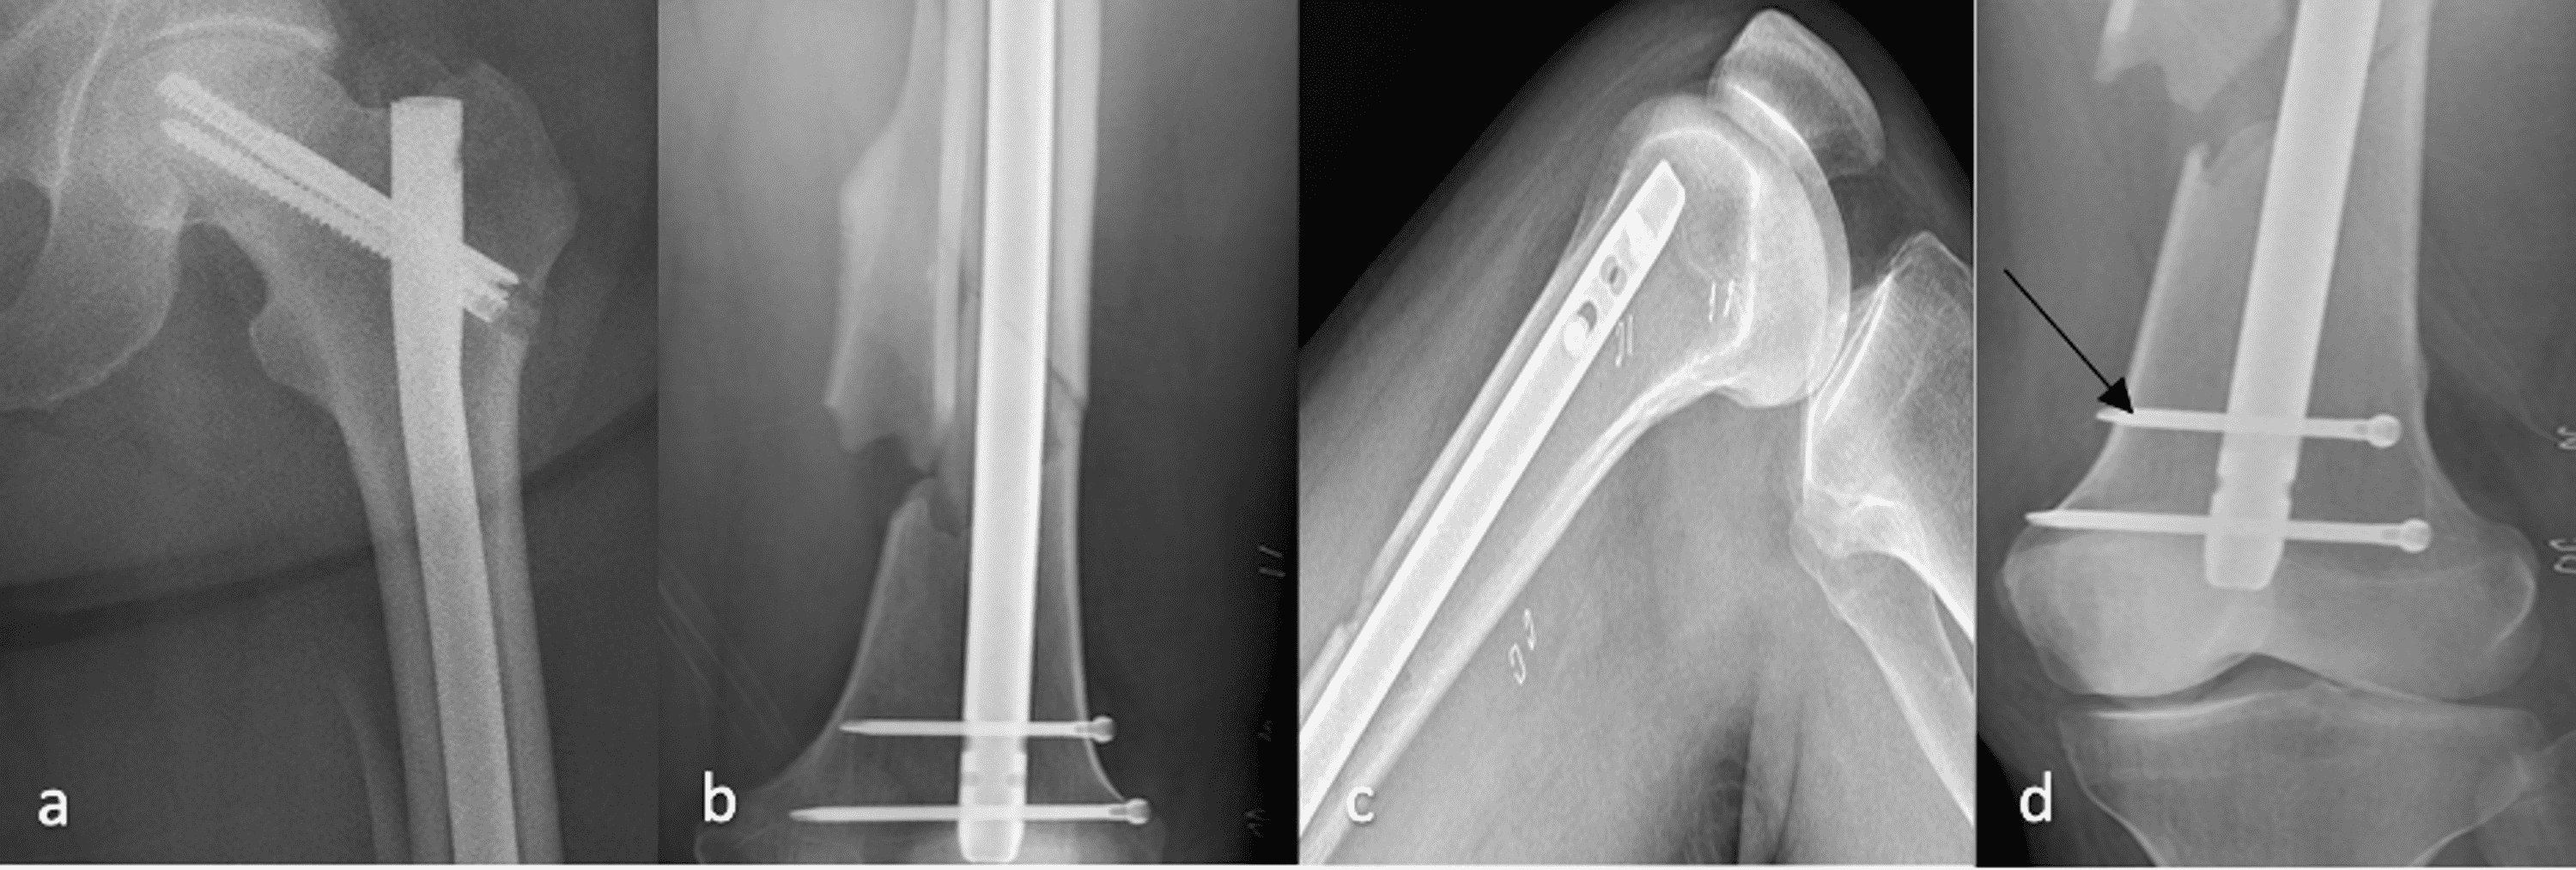 Cureus | Perforation of the Knee Joint Following Antegrade Intramedullary  Nailing of a Comminuted Femoral Diaphyseal Fracture: A Case Report | Article